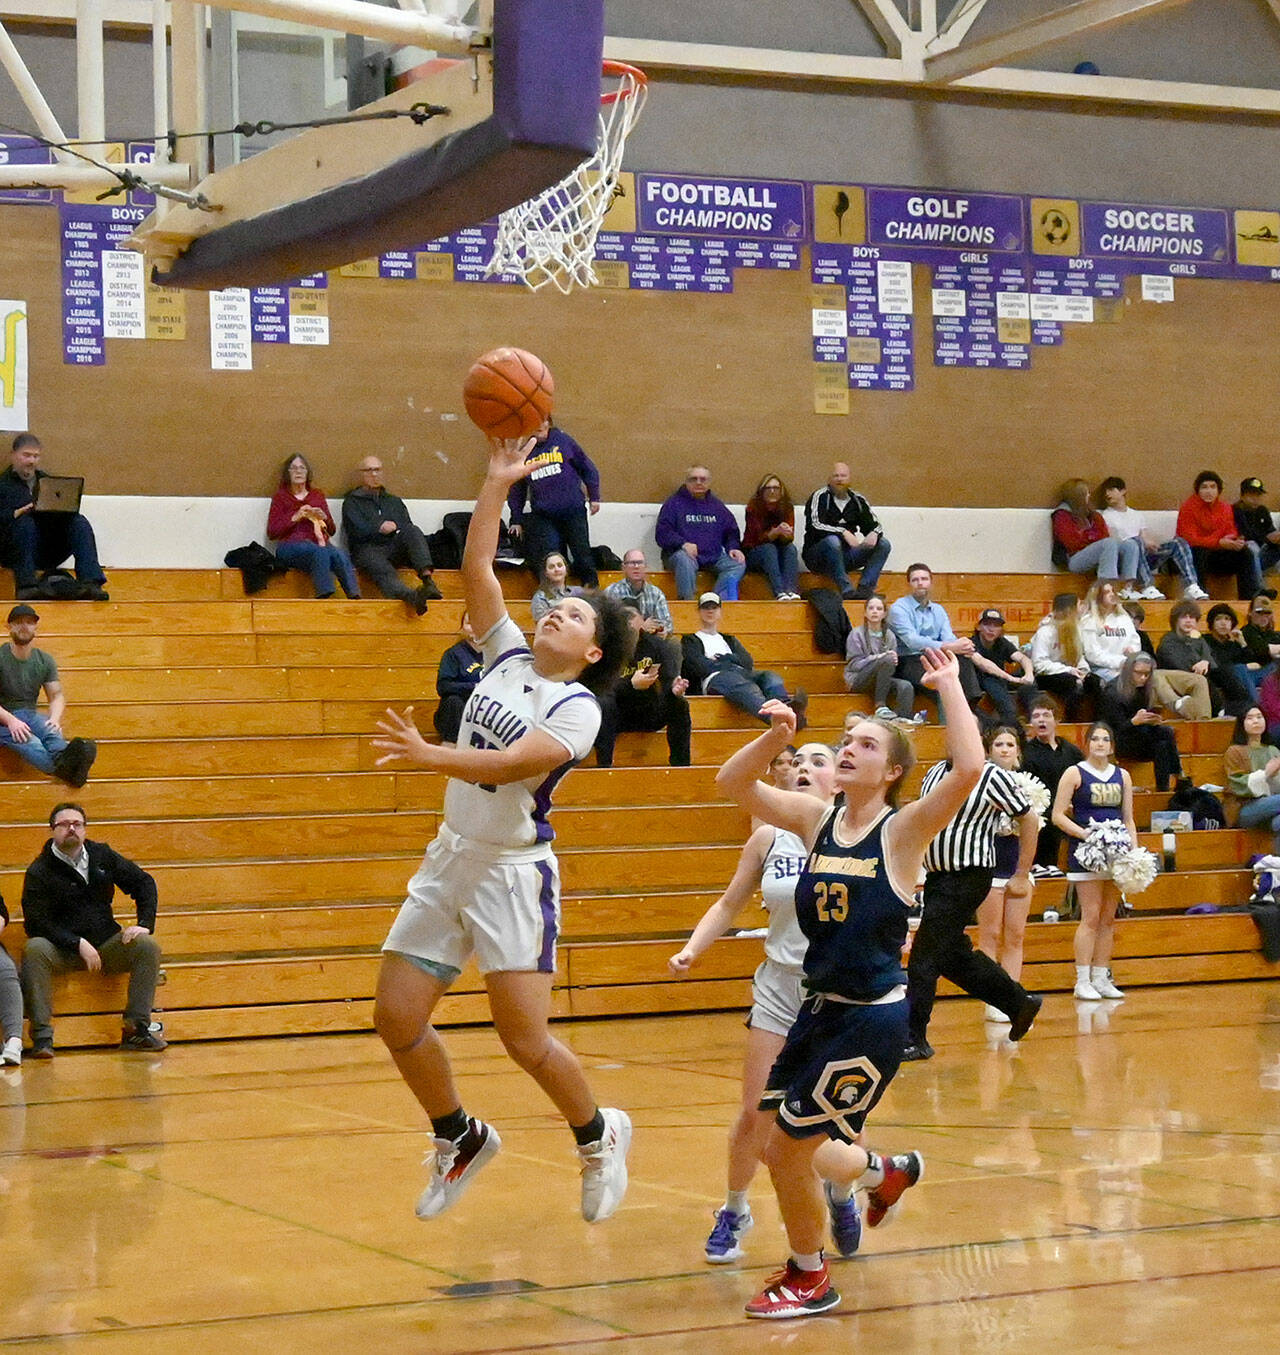 Michael Dashiell/Olympic Peninsula News Group Sequim’s Bobbi Mixon goes up for a layup while Bainbridge’s Sierra Berry and Sequim’s Hannah Bates look on during the Wolves’ win Thursday.